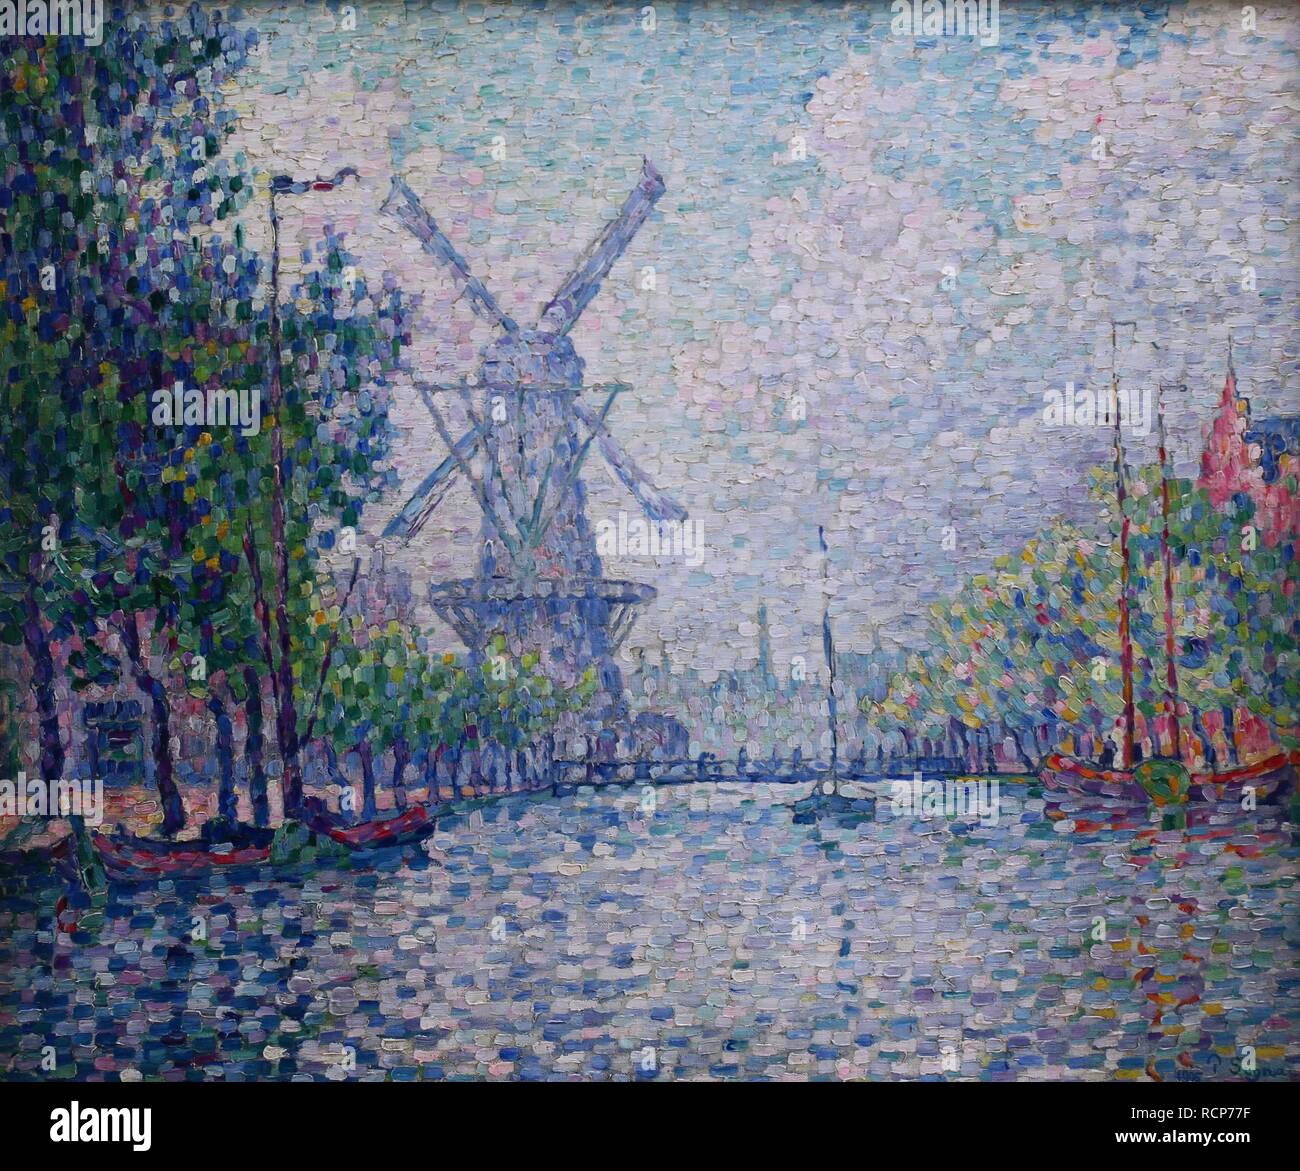 Rotterdam, the mill, the canal, the morning (Rotterdam. Le moulin. Le canal. Le matin). Museum: Kröller-Müller Museum, Otterlo. Author: SIGNAC, PAUL. Stock Photo